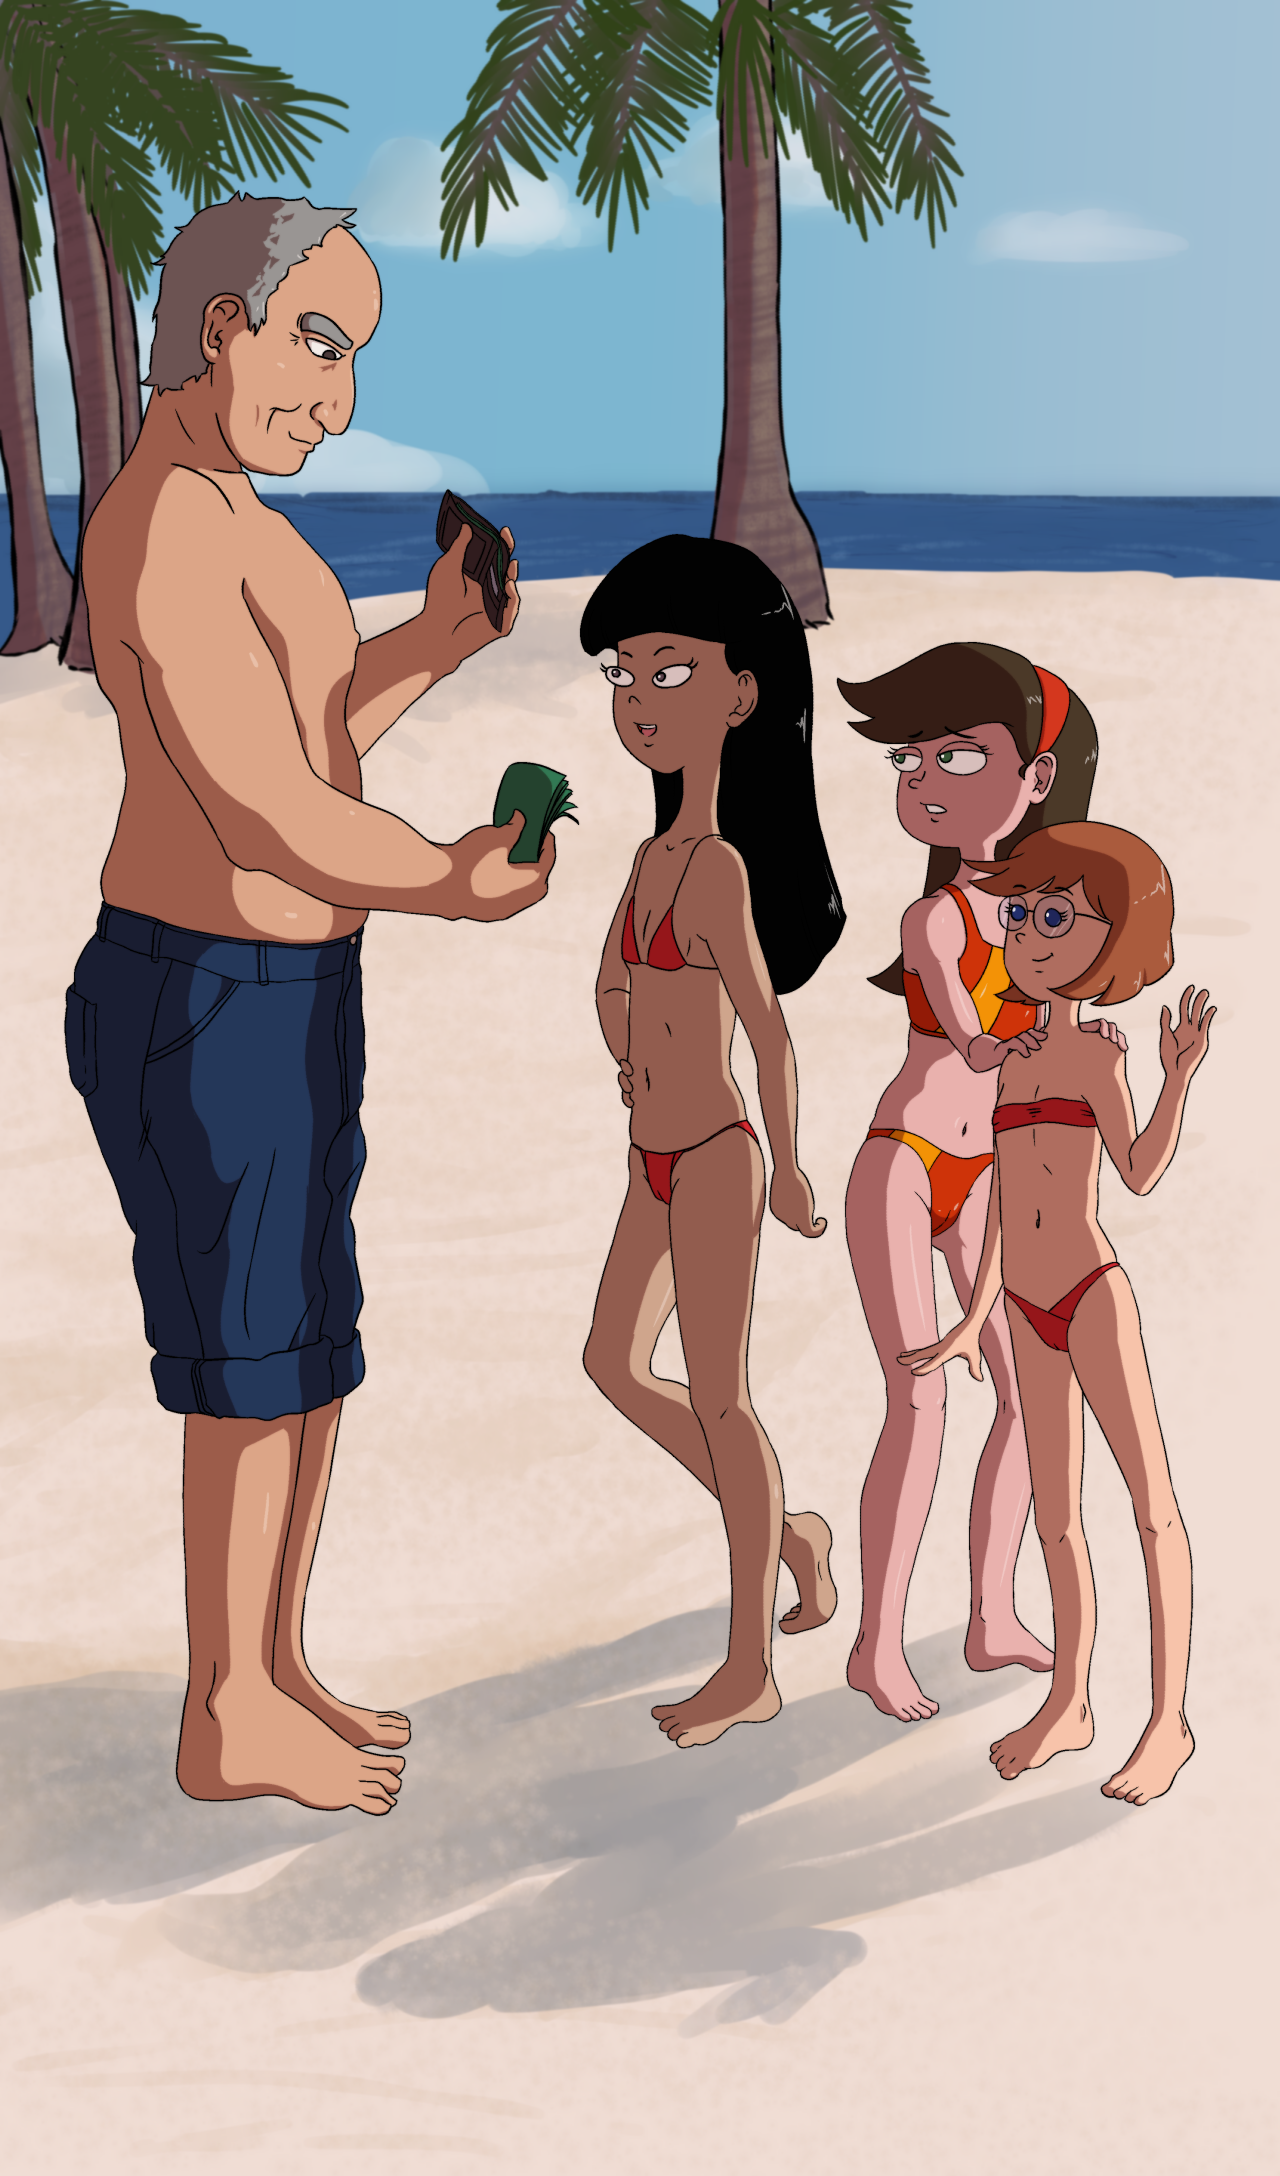 gogofap_Part-time-at-the-beach-07_79086655.png